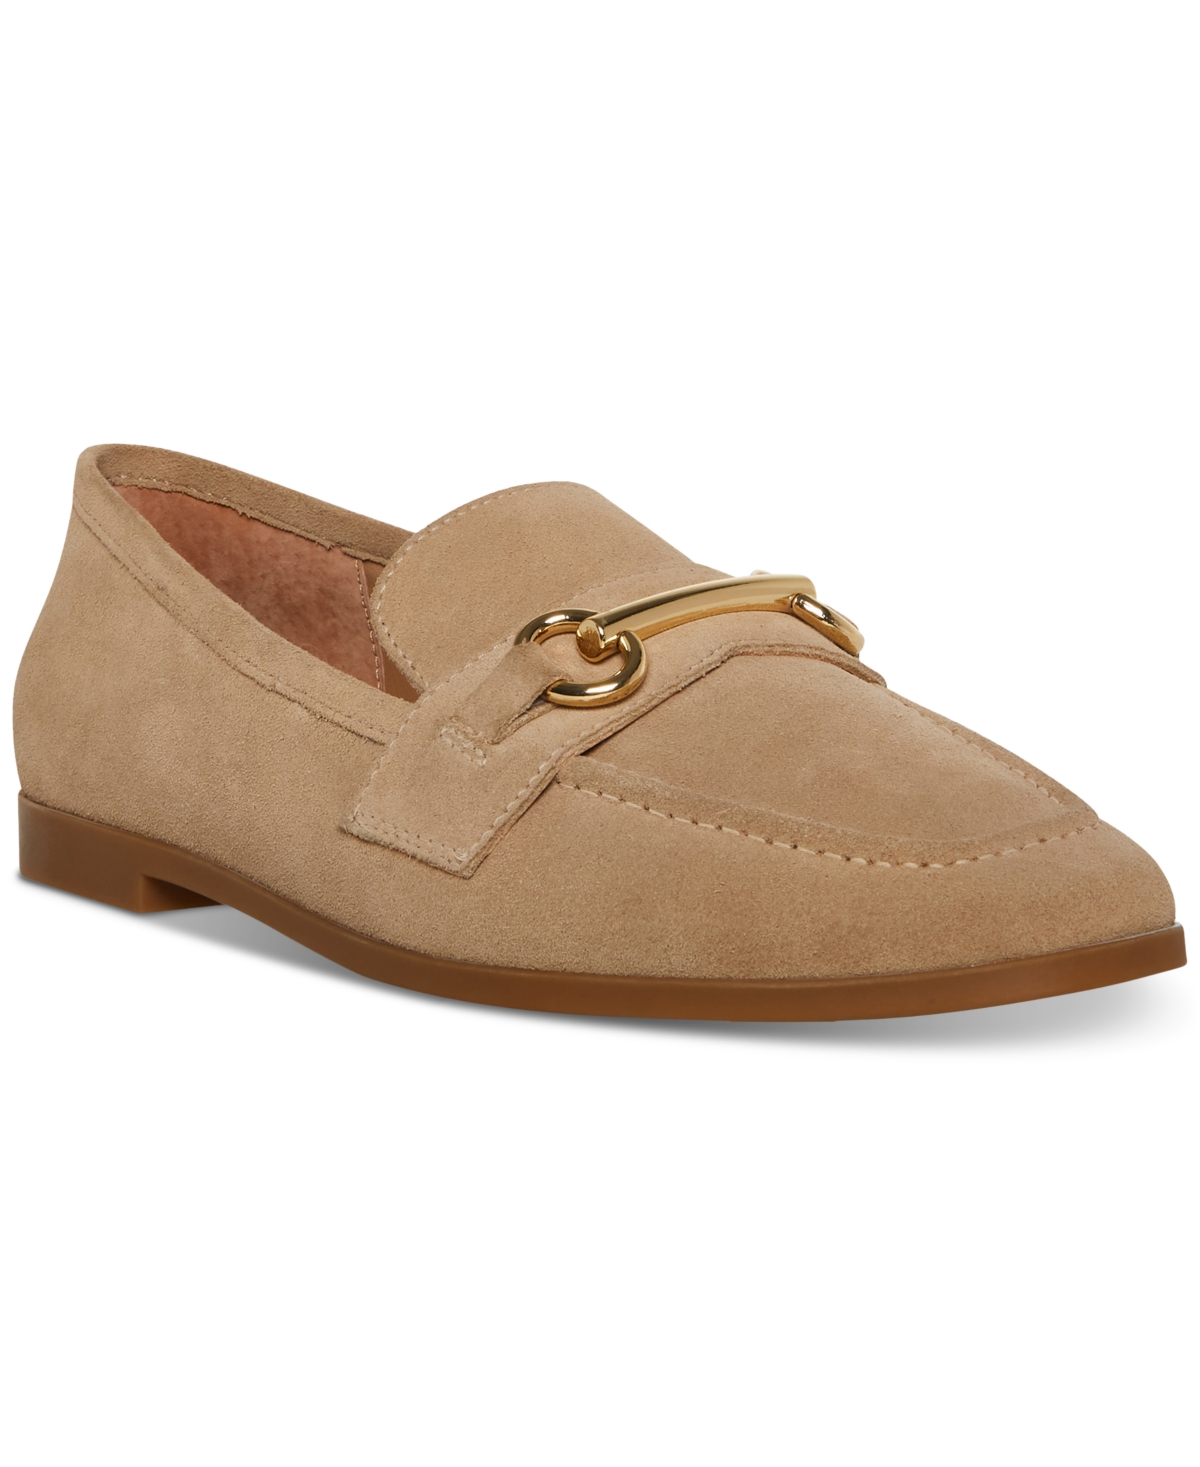 Aqua College Women's Cosmo Bit Buckle Slip-on Loafer Flats Women's Shoes In Sand